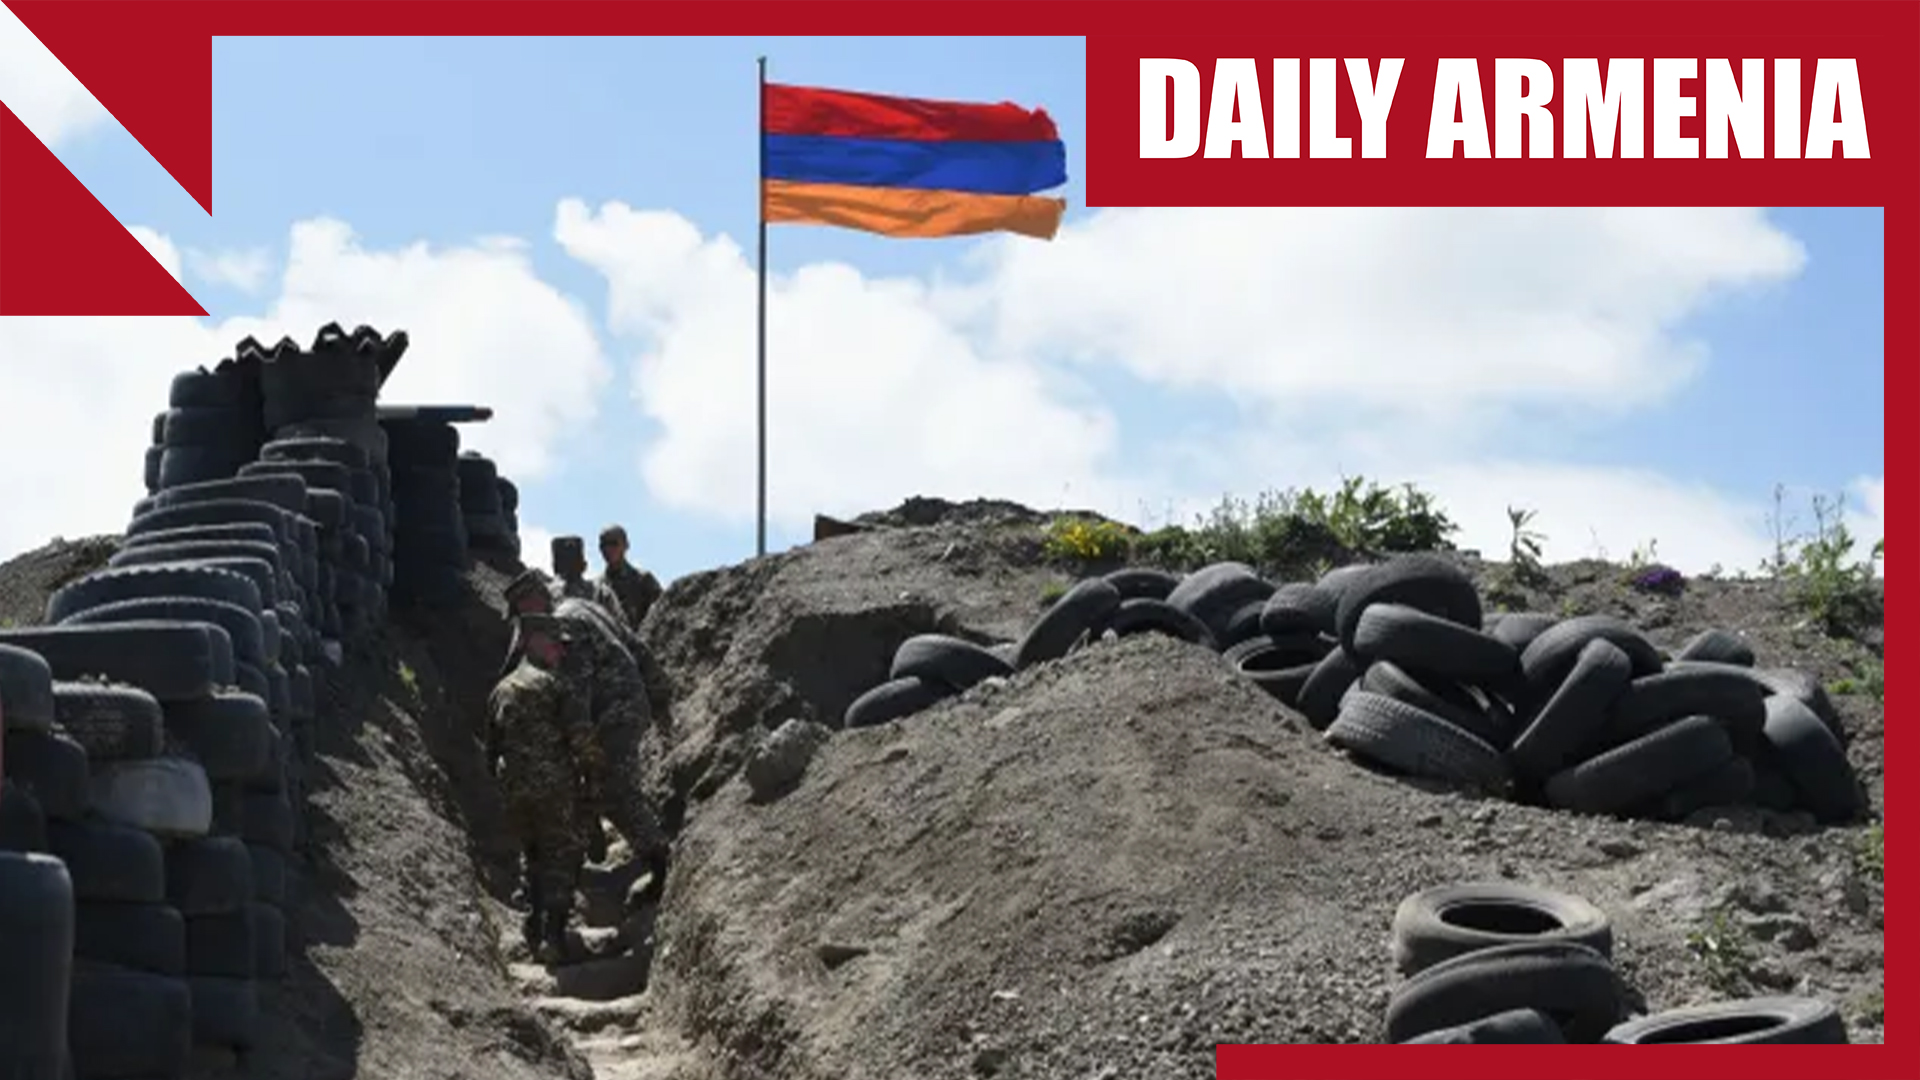 Armenia accuses Azerbaijan of “preparing the ground” for further aggression in Karabakh